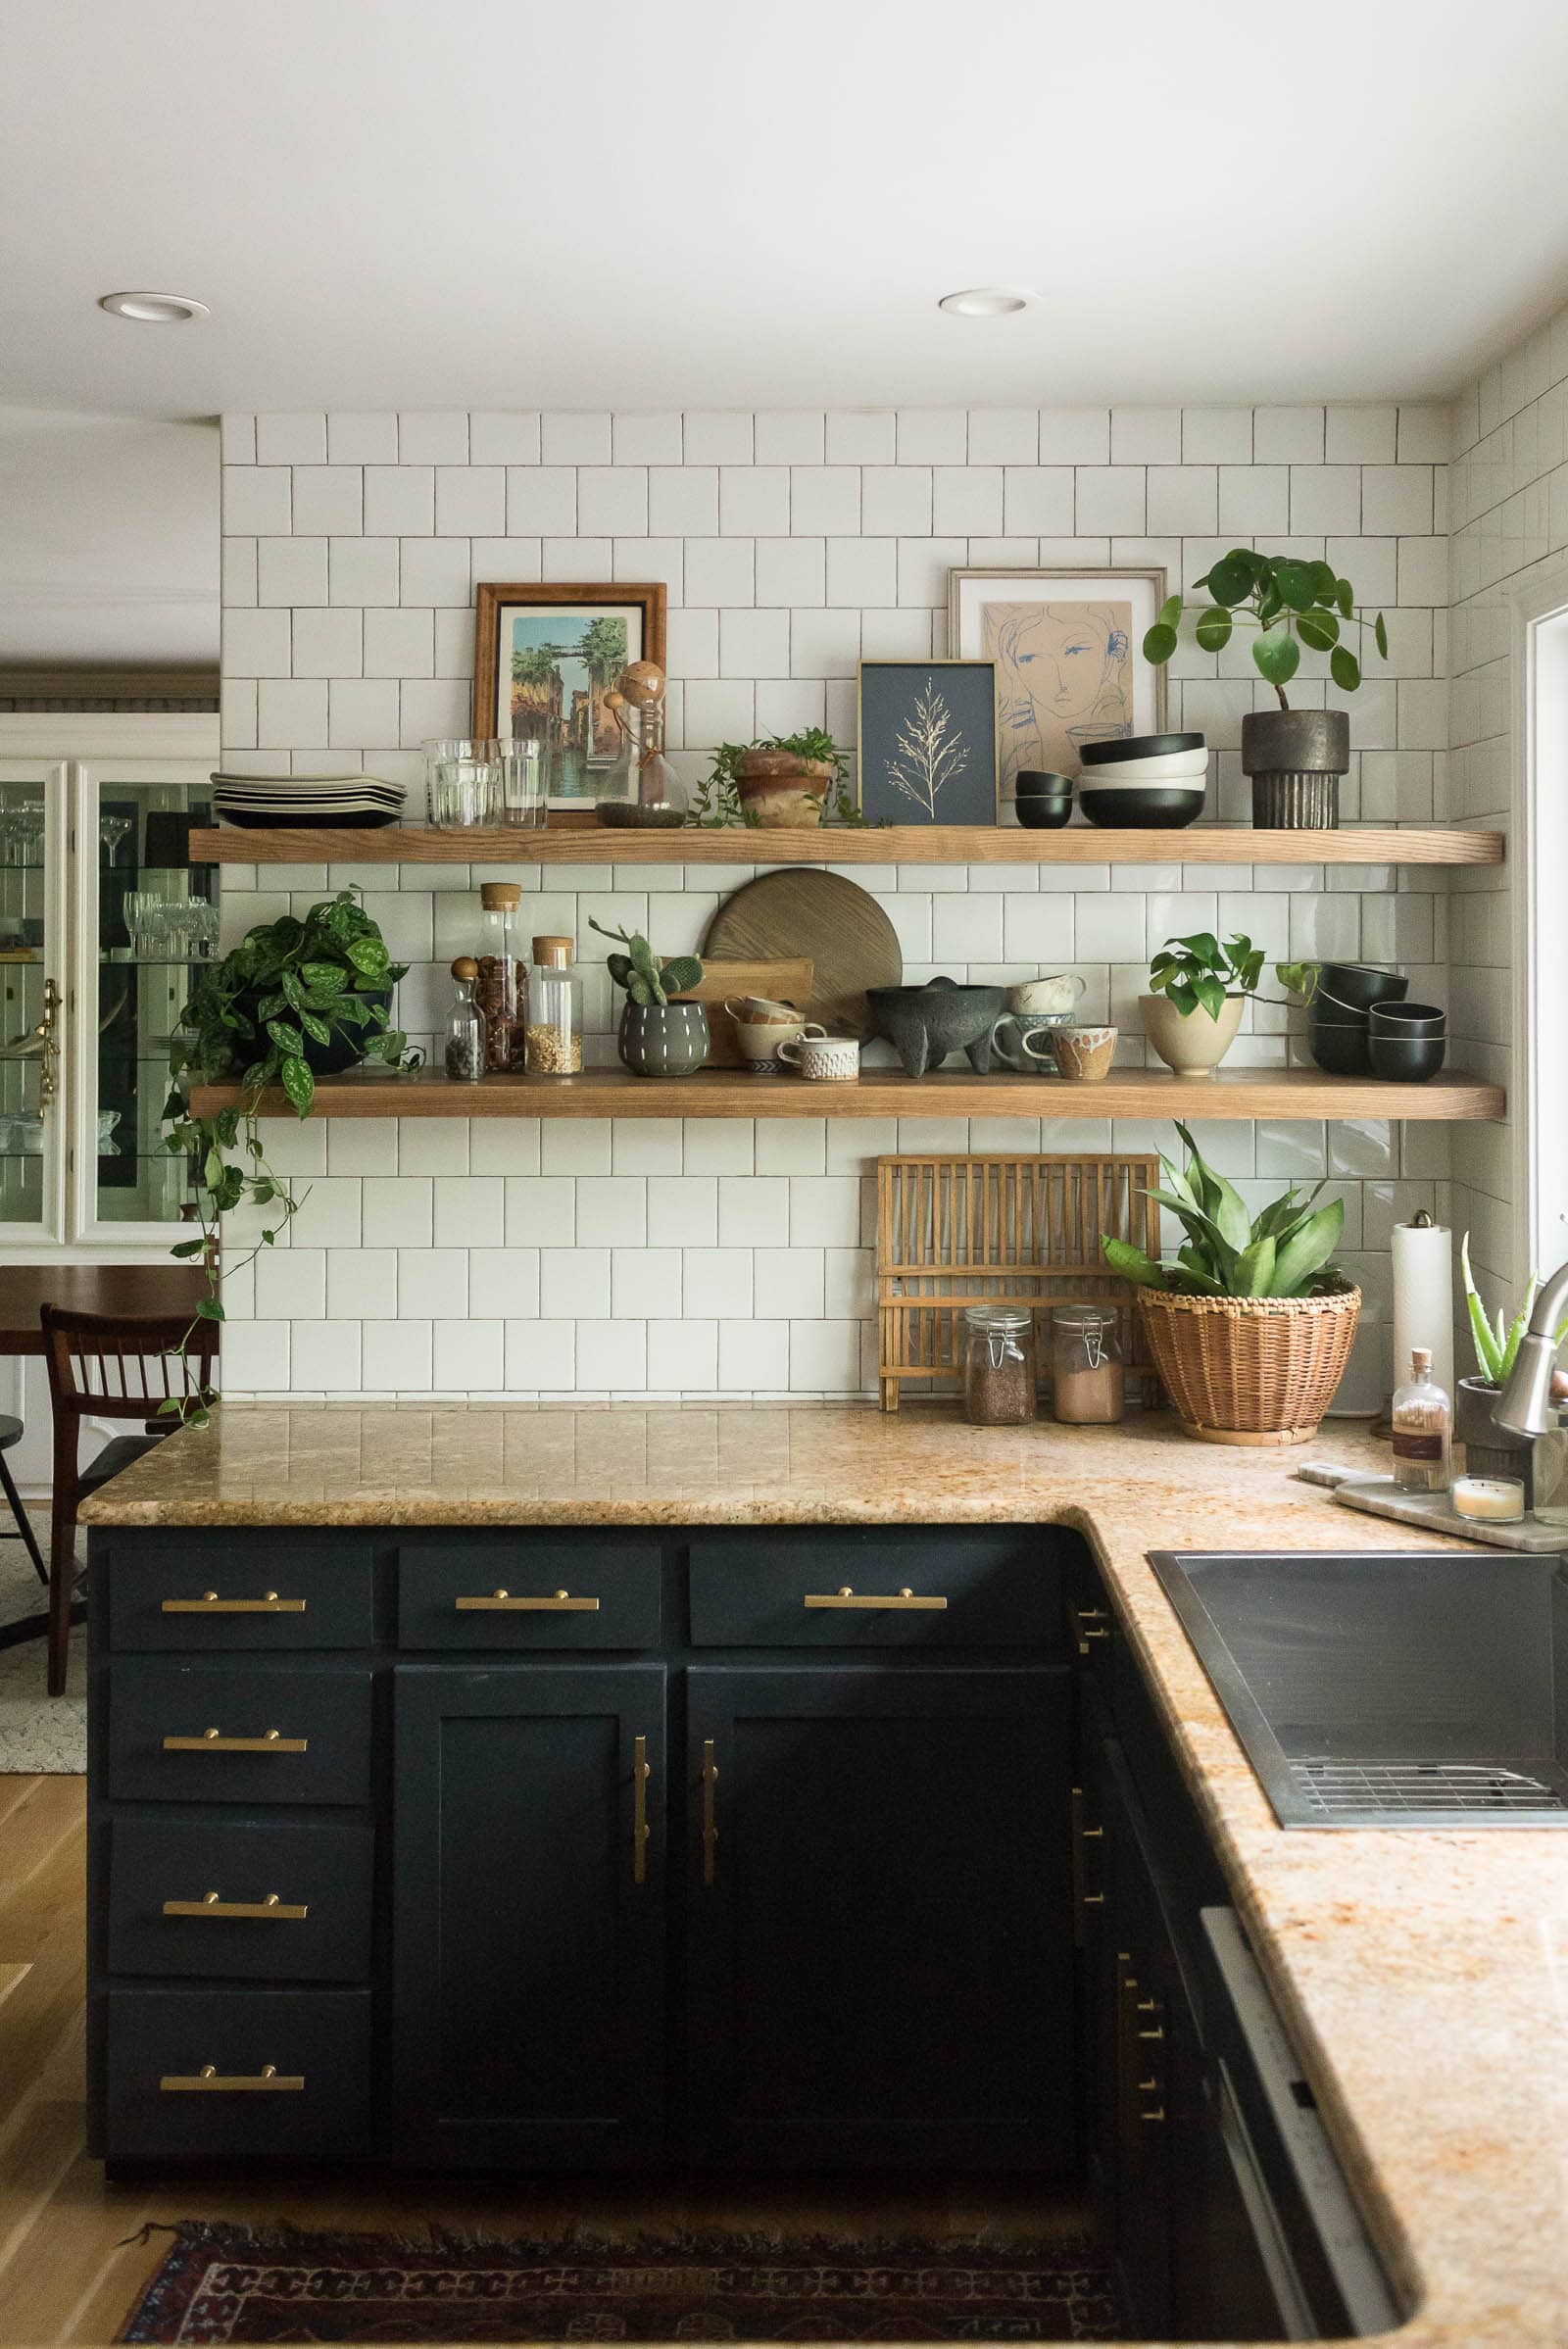 Cut Corners With The Kitchen Shelving, How To Place Floating Shelves In Kitchen